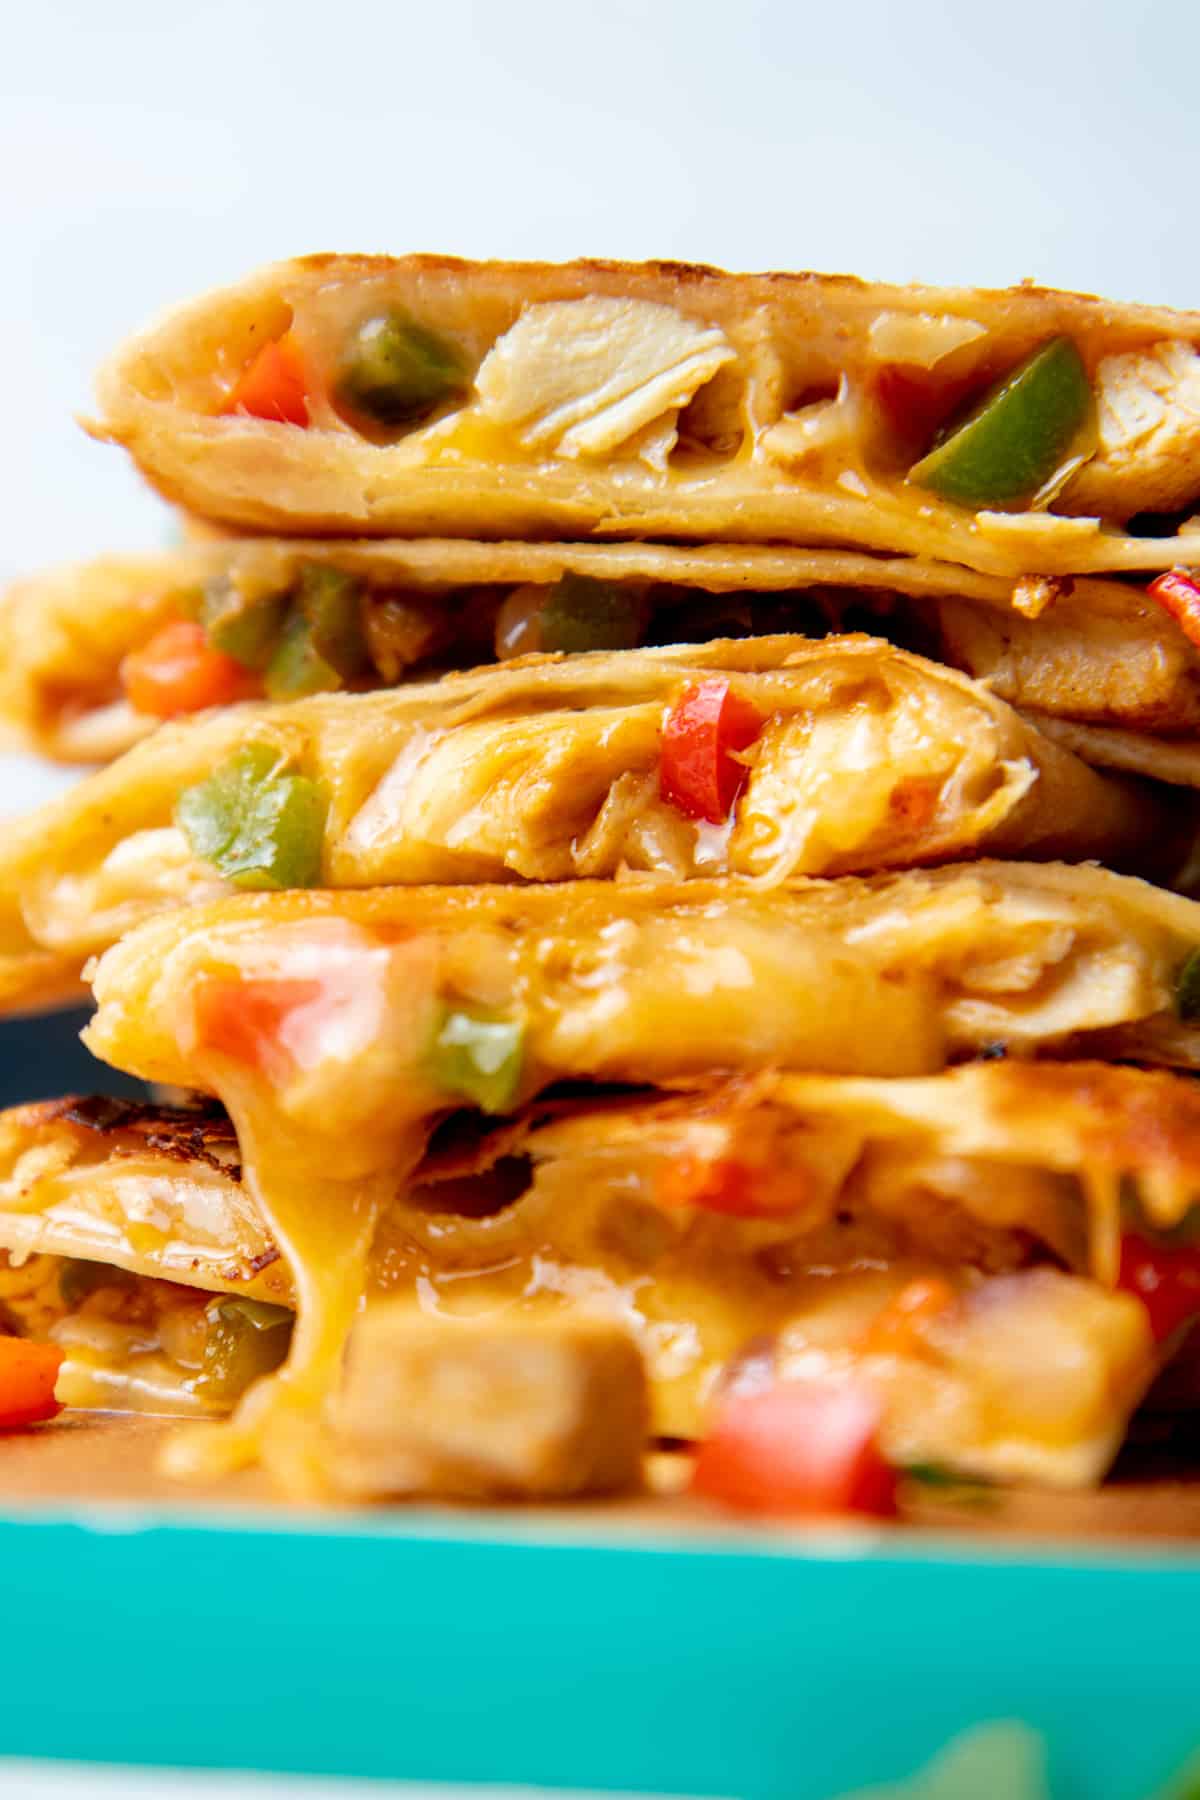 Stack of quesadilla slices filled with chicken, peppers, and cheese. The stack sits on a teal-edged cutting board.